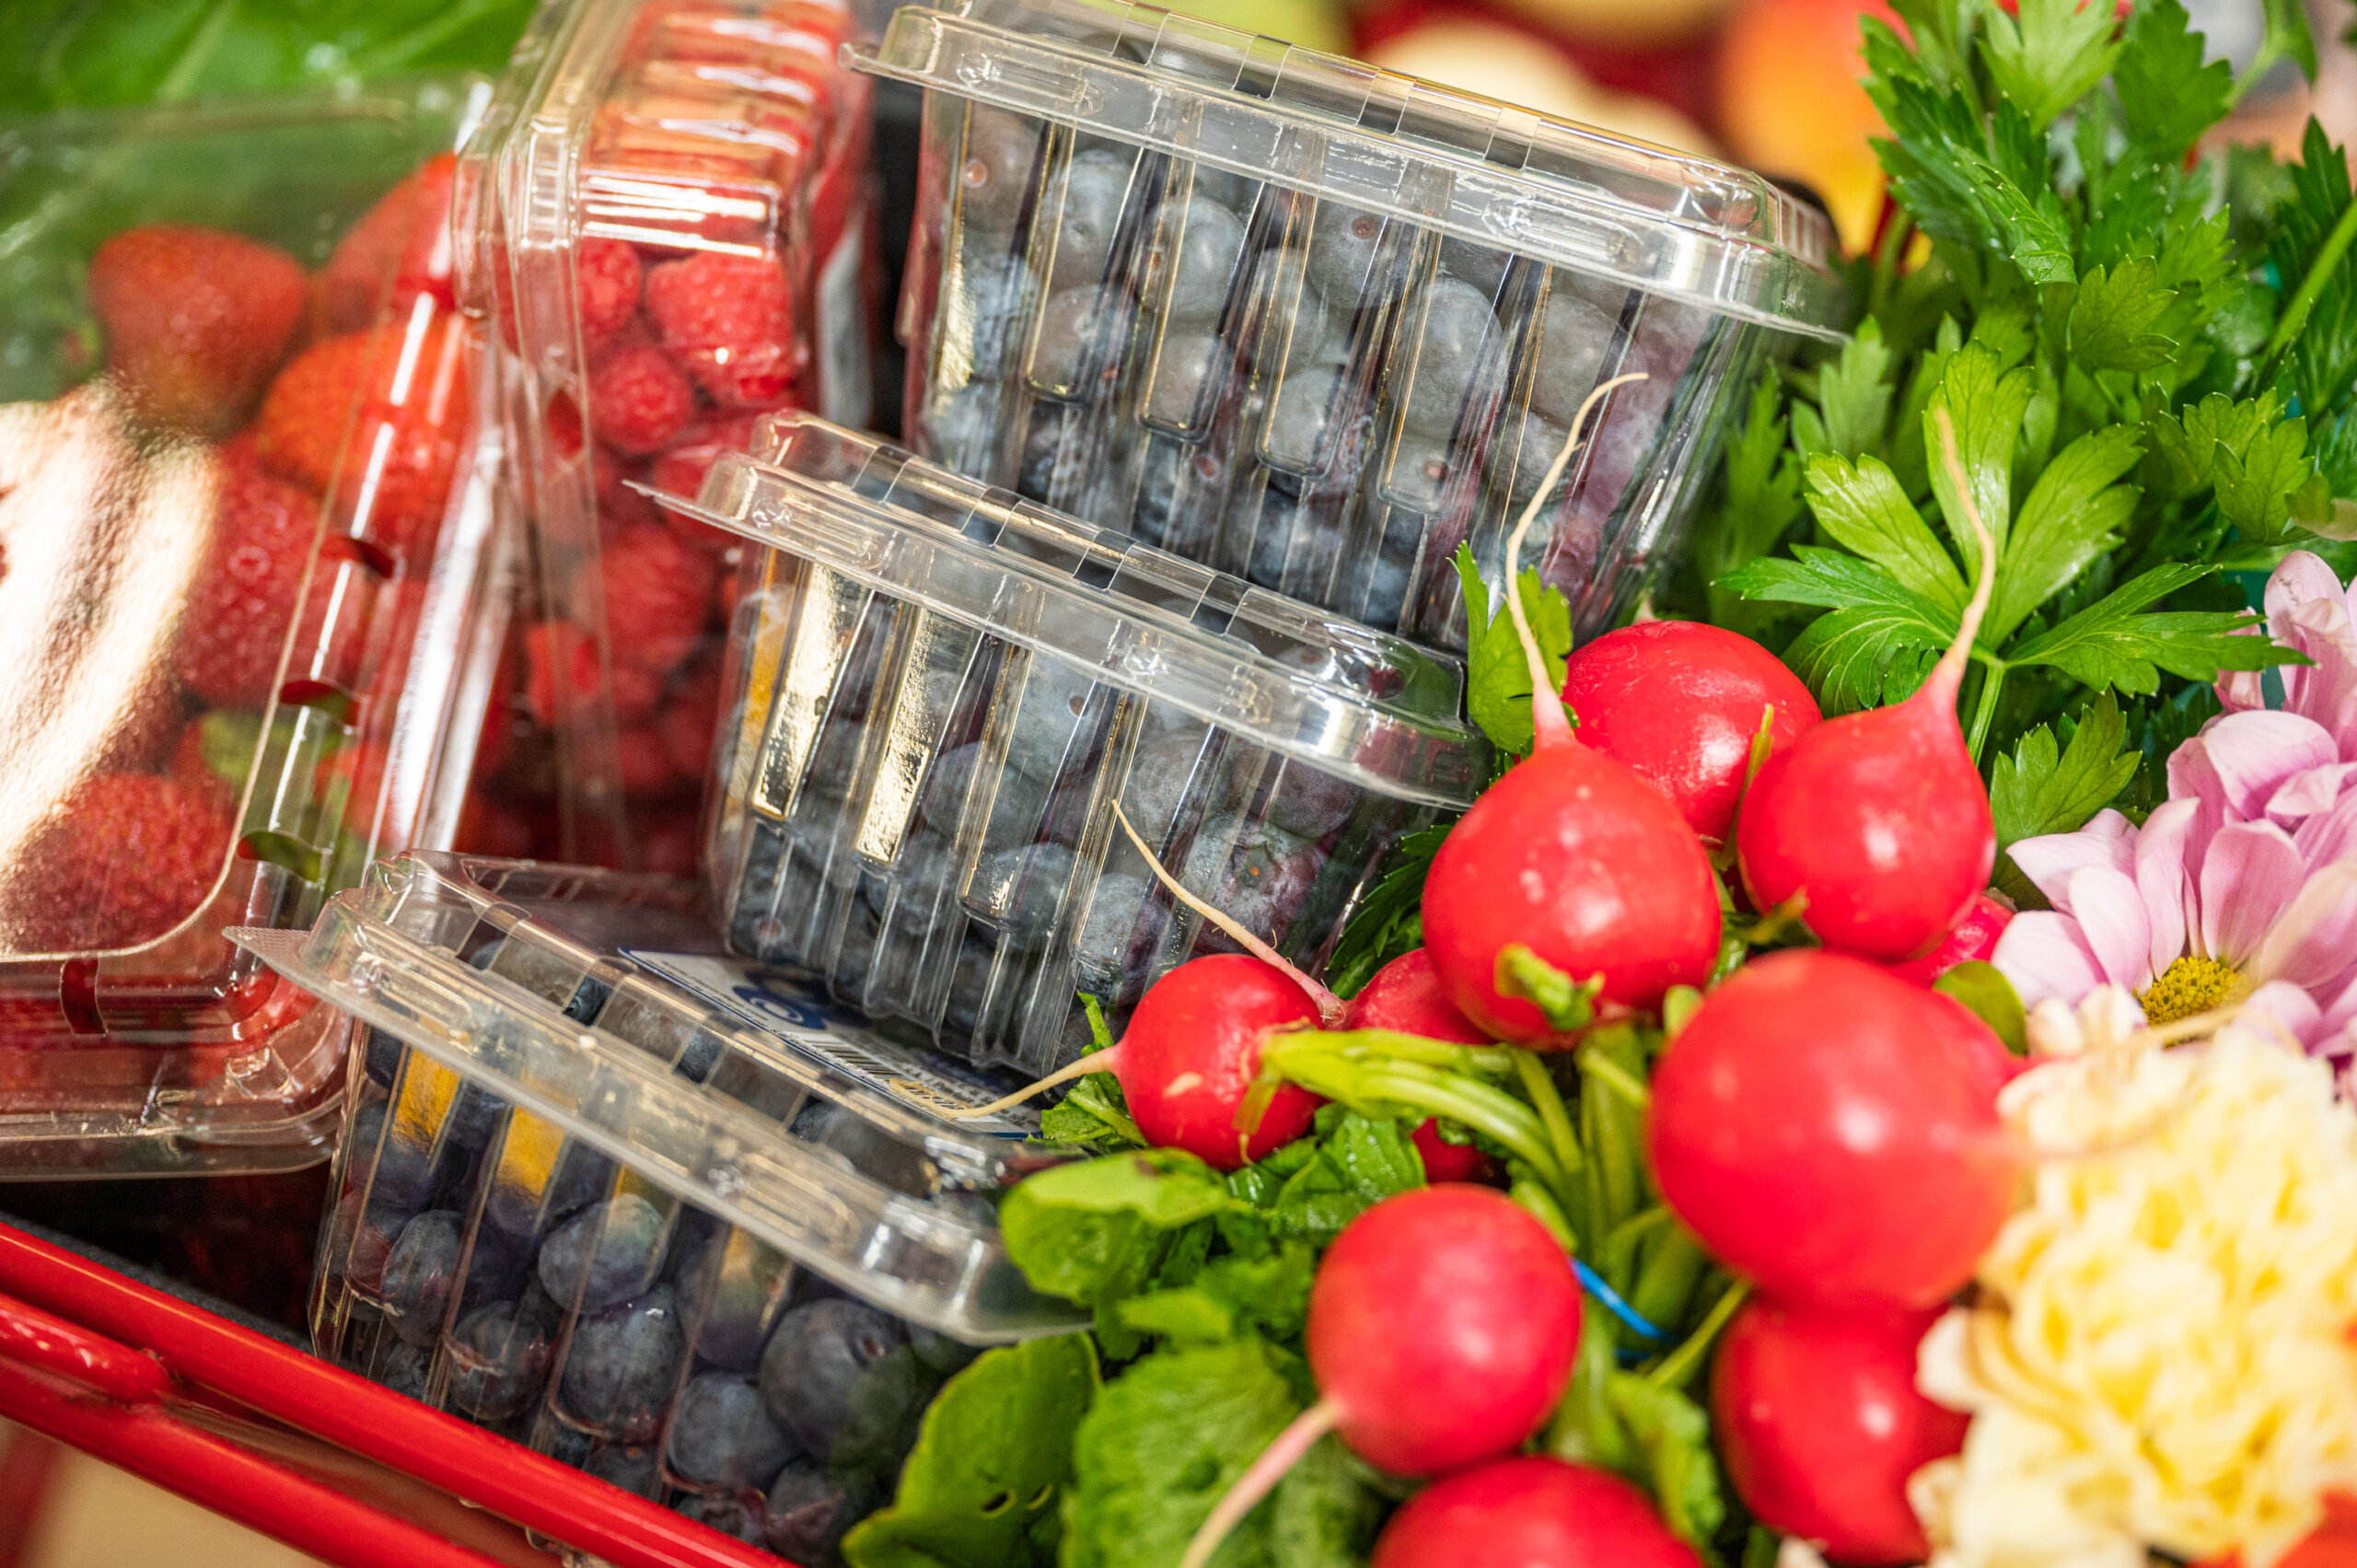 Fresh blueberries and radishes in a shopping cart